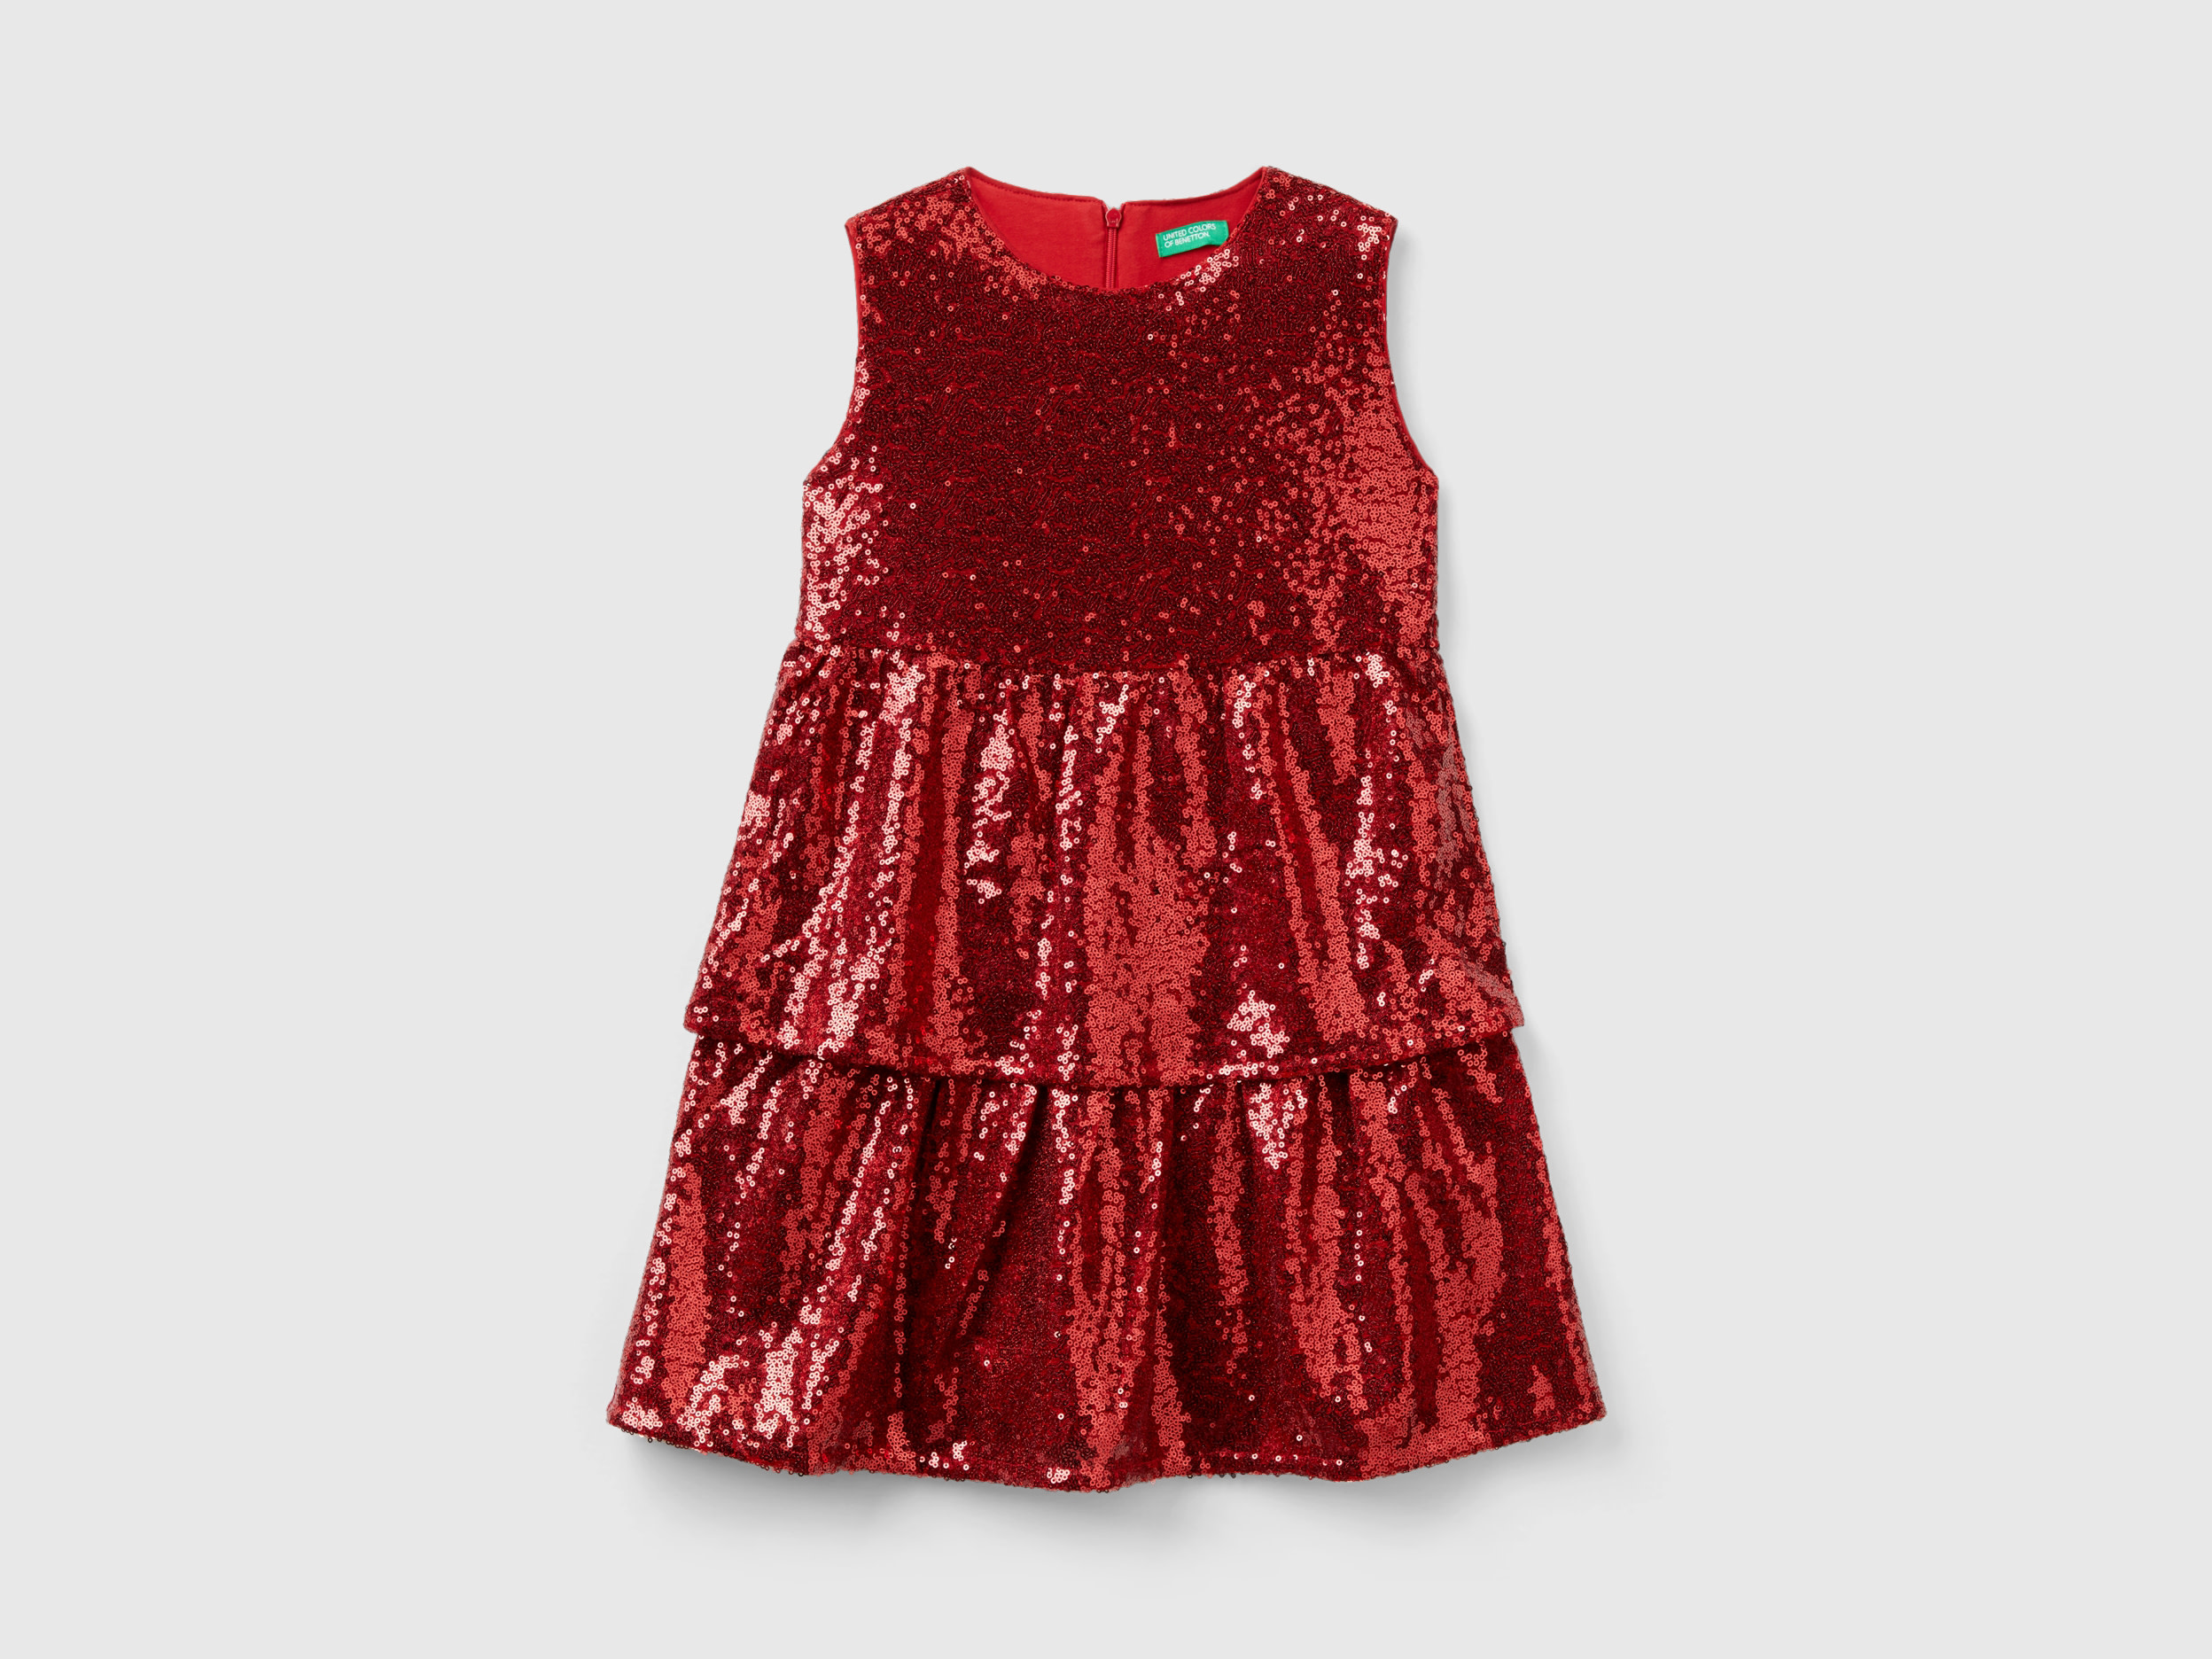 Benetton, Dress With Sequins, size 2XL, Red, Kids